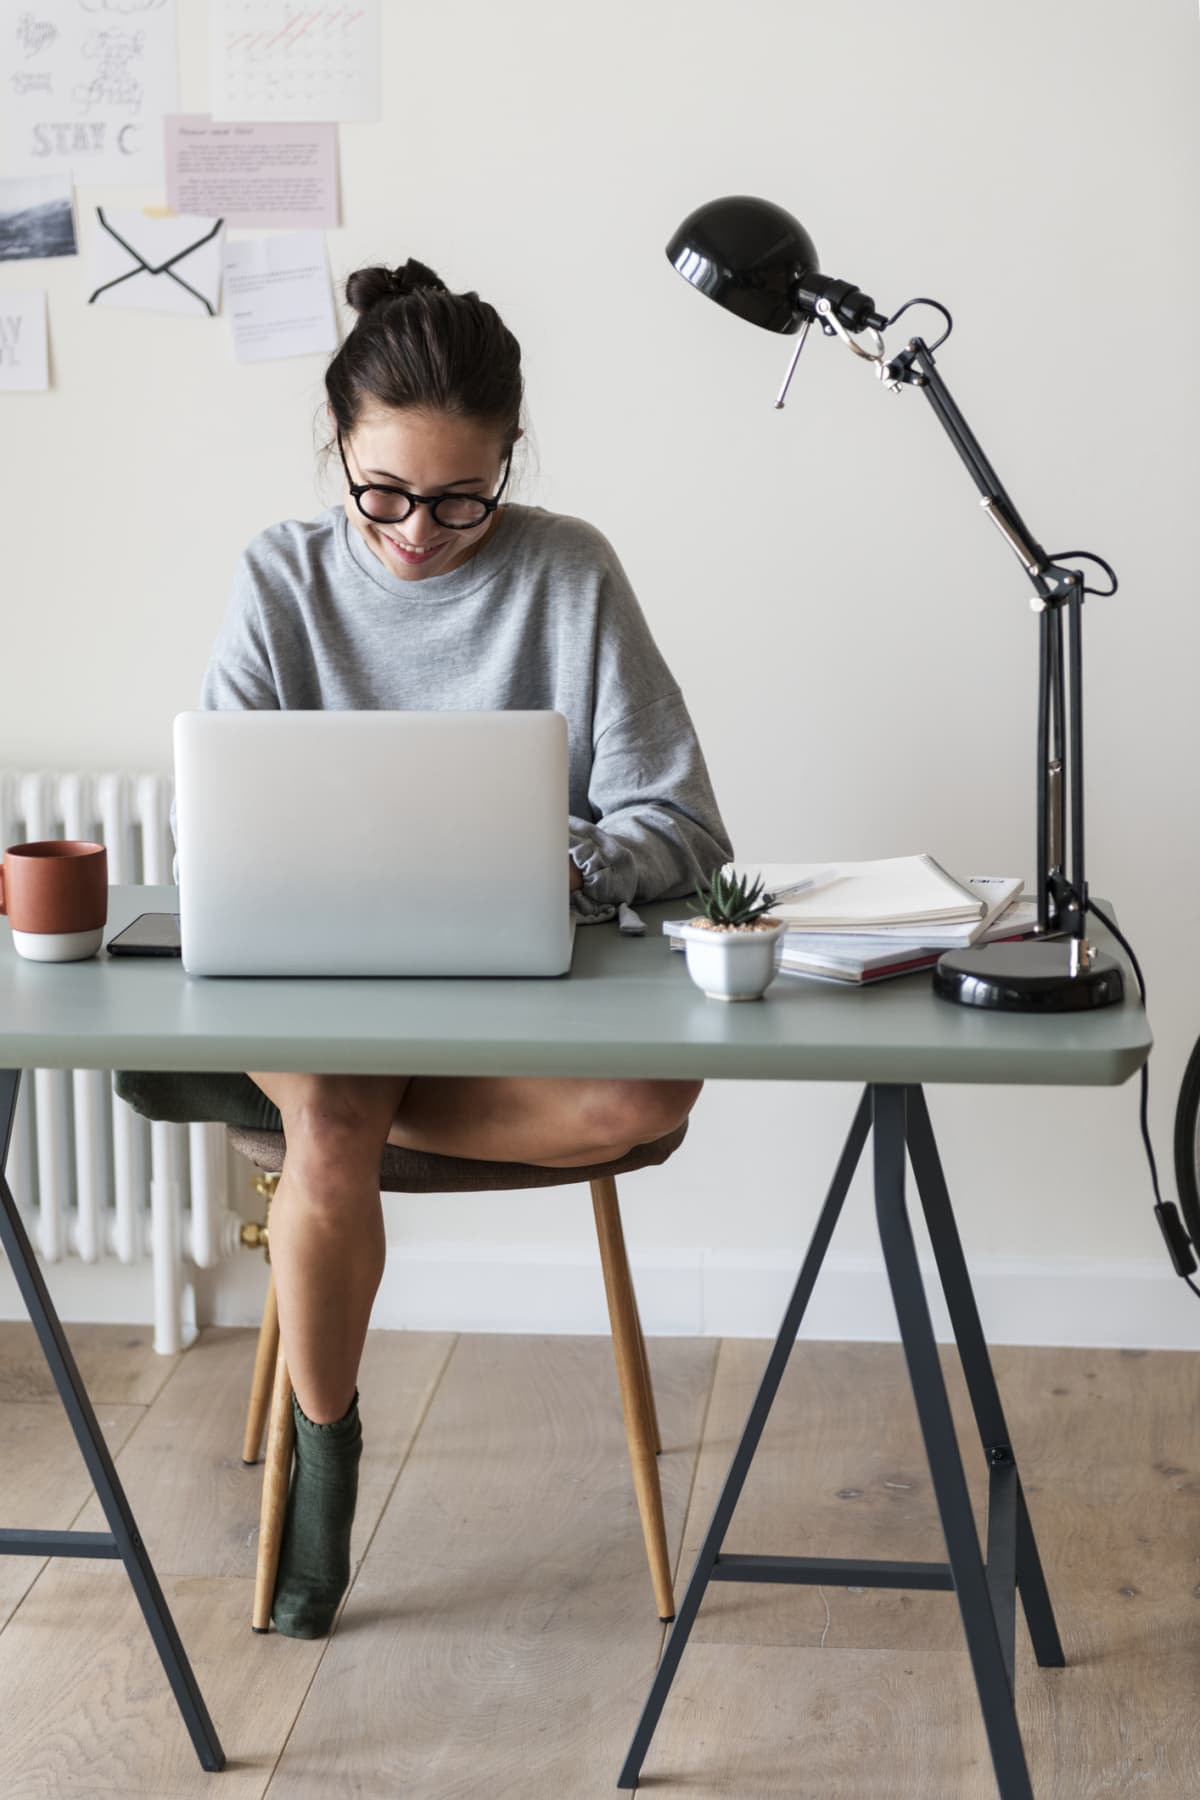 Woman works from home in a sweatshirt and socks